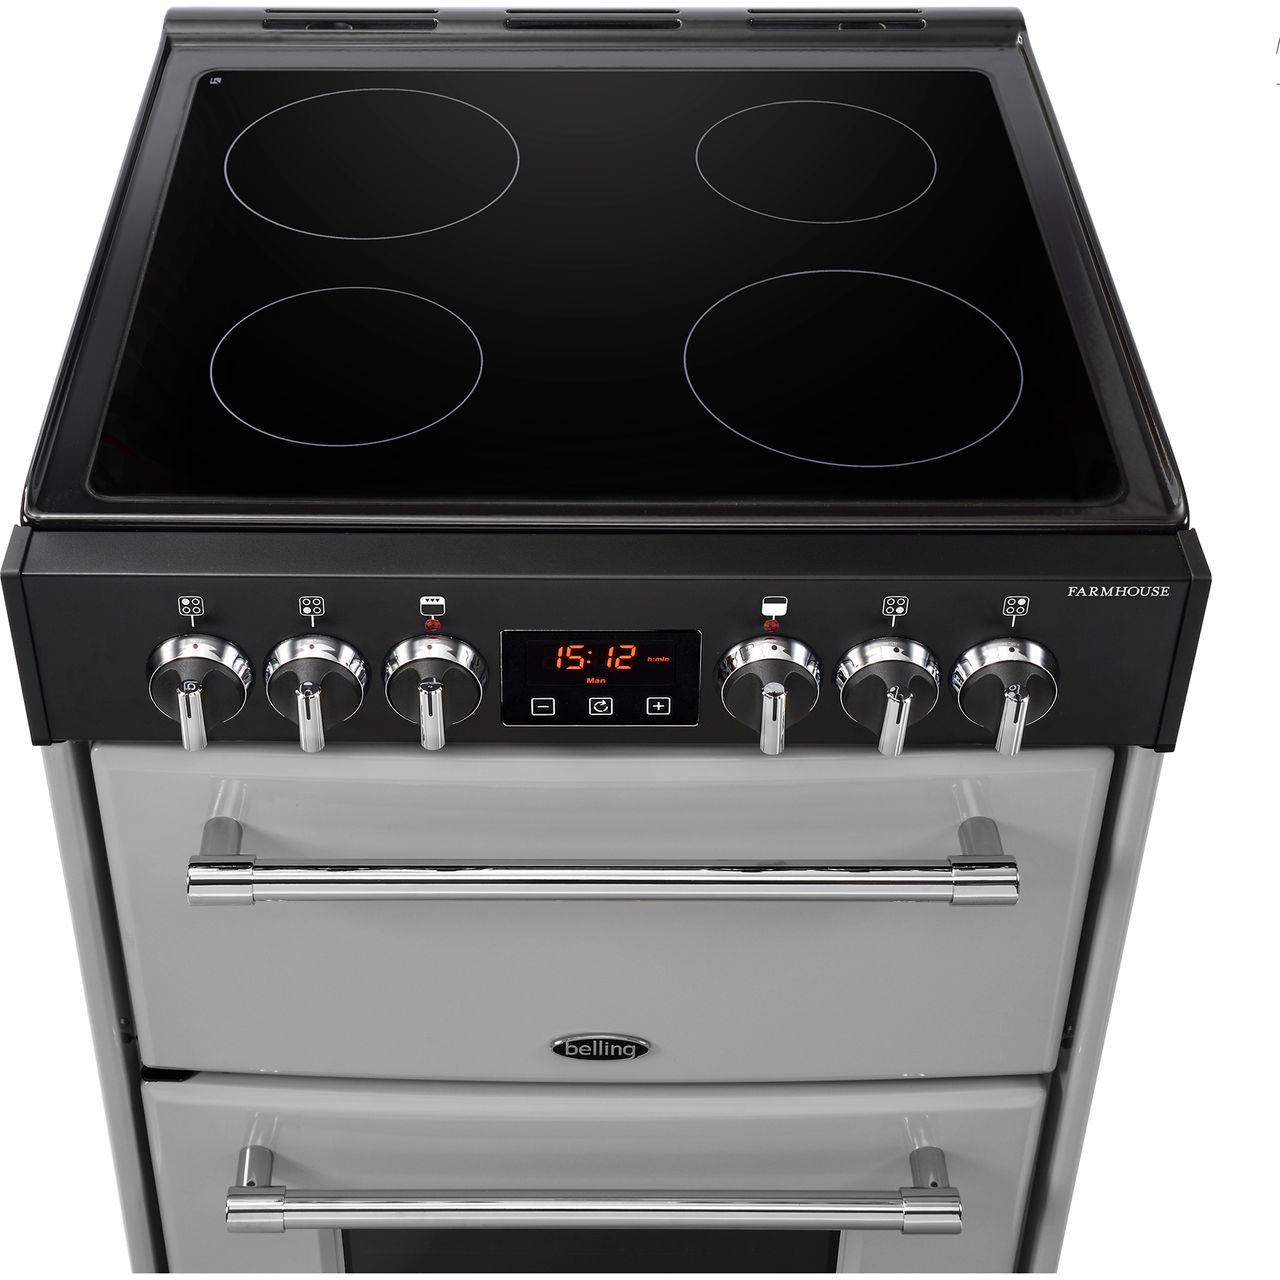 black and silver electric cooker